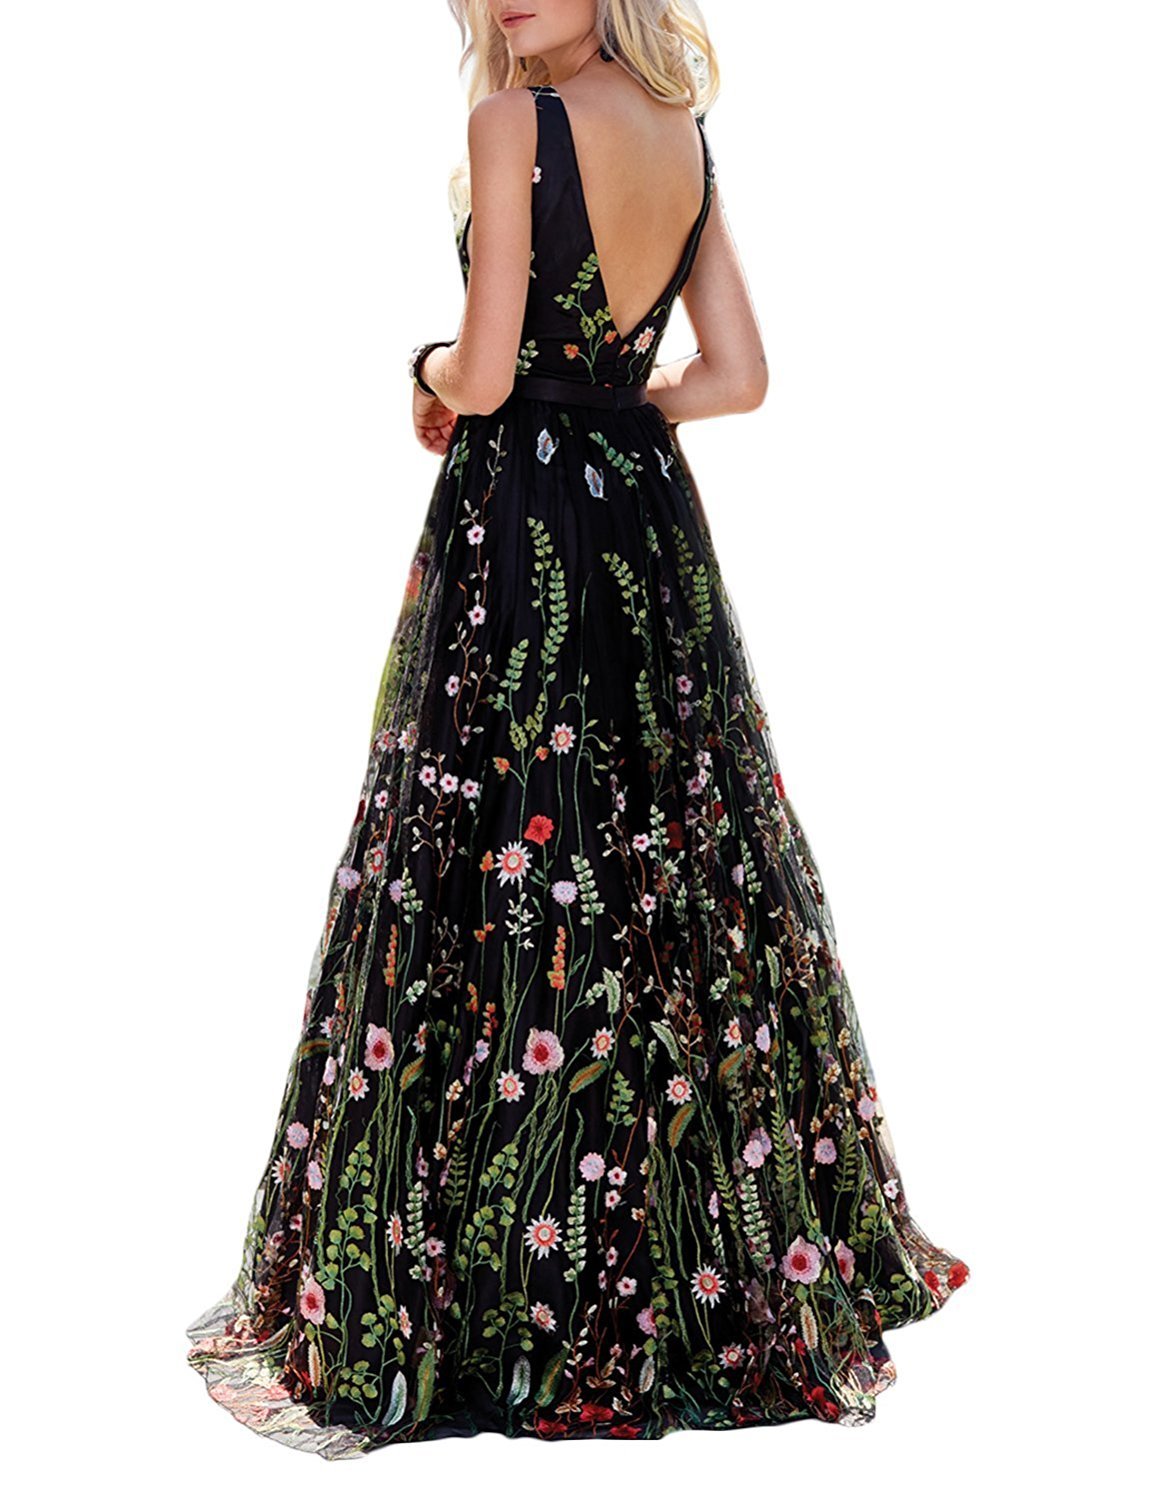 Womens V Neck Ball Gown Embroidery Evening Dresses Floral Print Long